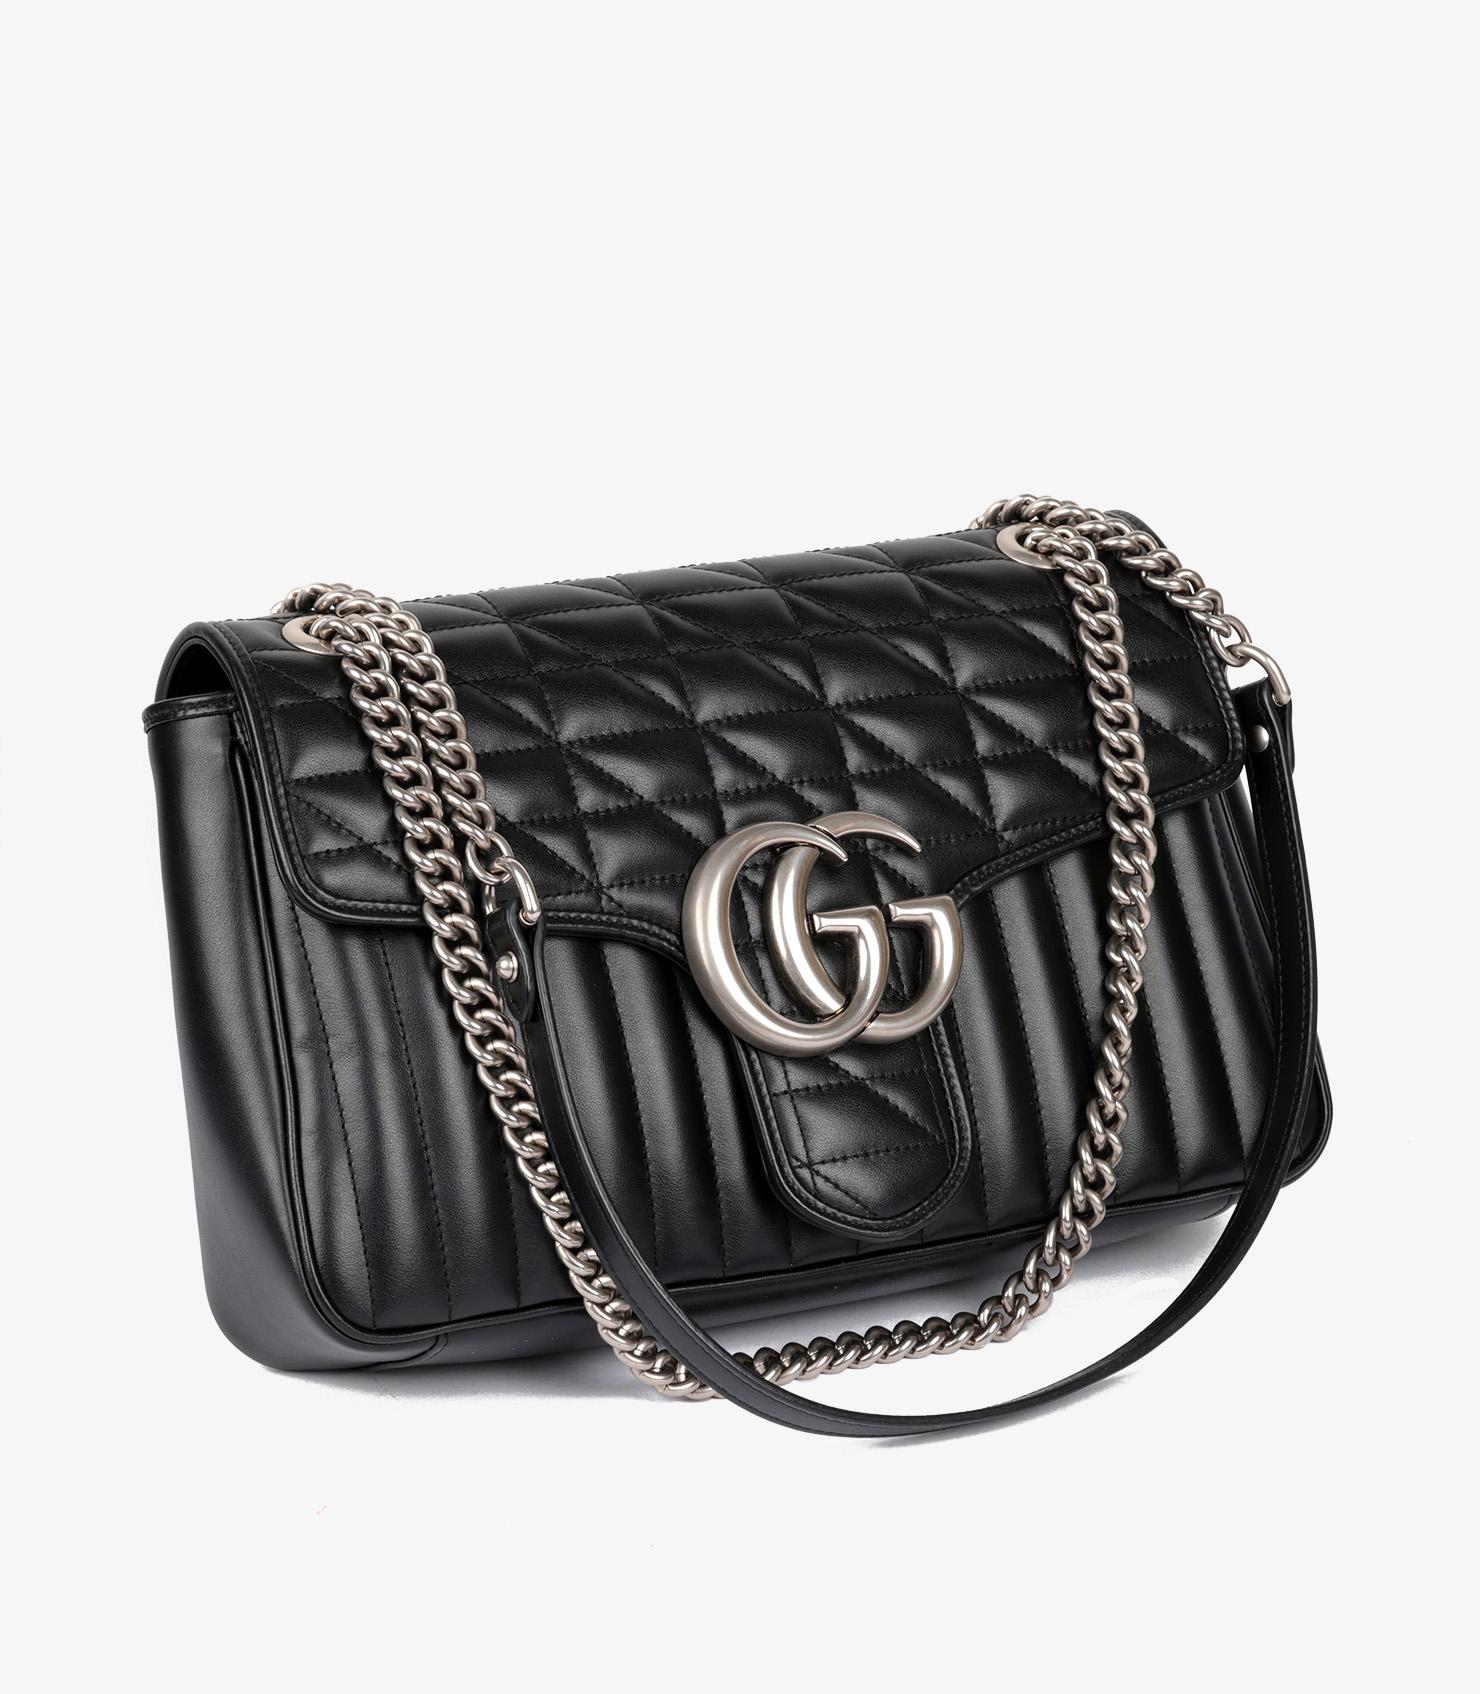 Gucci Black Quilted Calfskin Leather Medium GG Marmont

Brand- Gucci
Model- Medium GG Marmont
Product Type- Crossbody, Shoulder
Serial Number- G0*******
Age- Circa 2023
Accompanied By- Gucci Dust Bag, Box, Care Booklet, Ribbon
Colour-